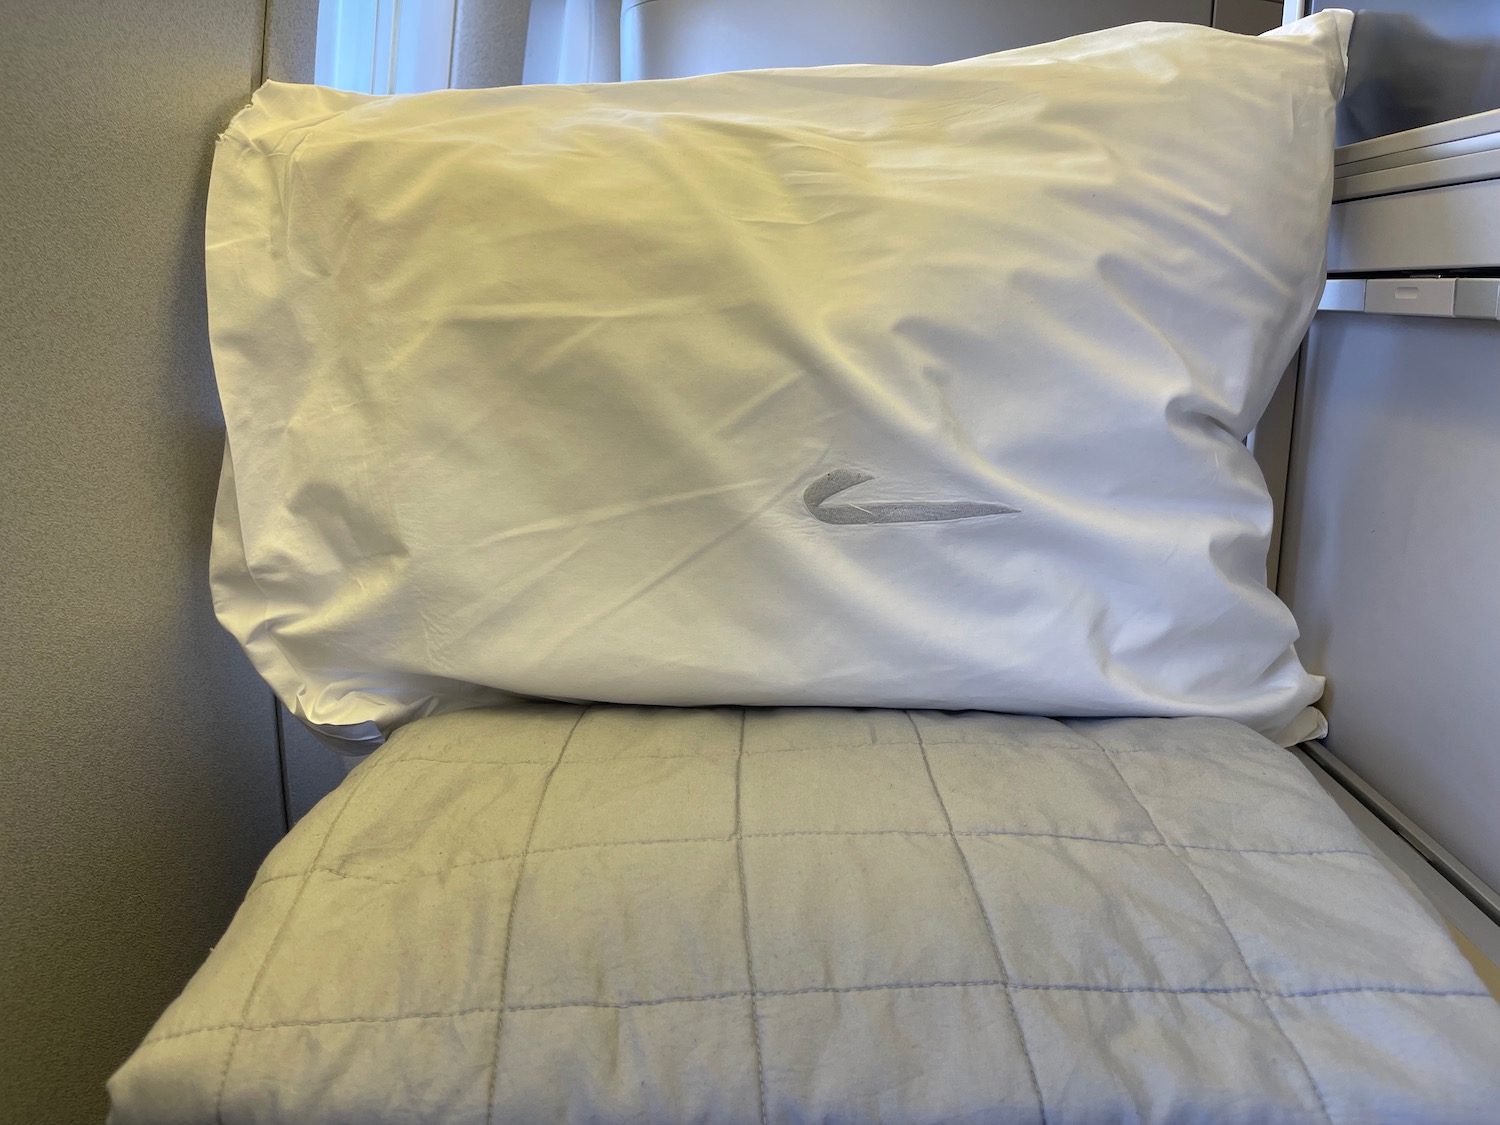 a pillow on a bed